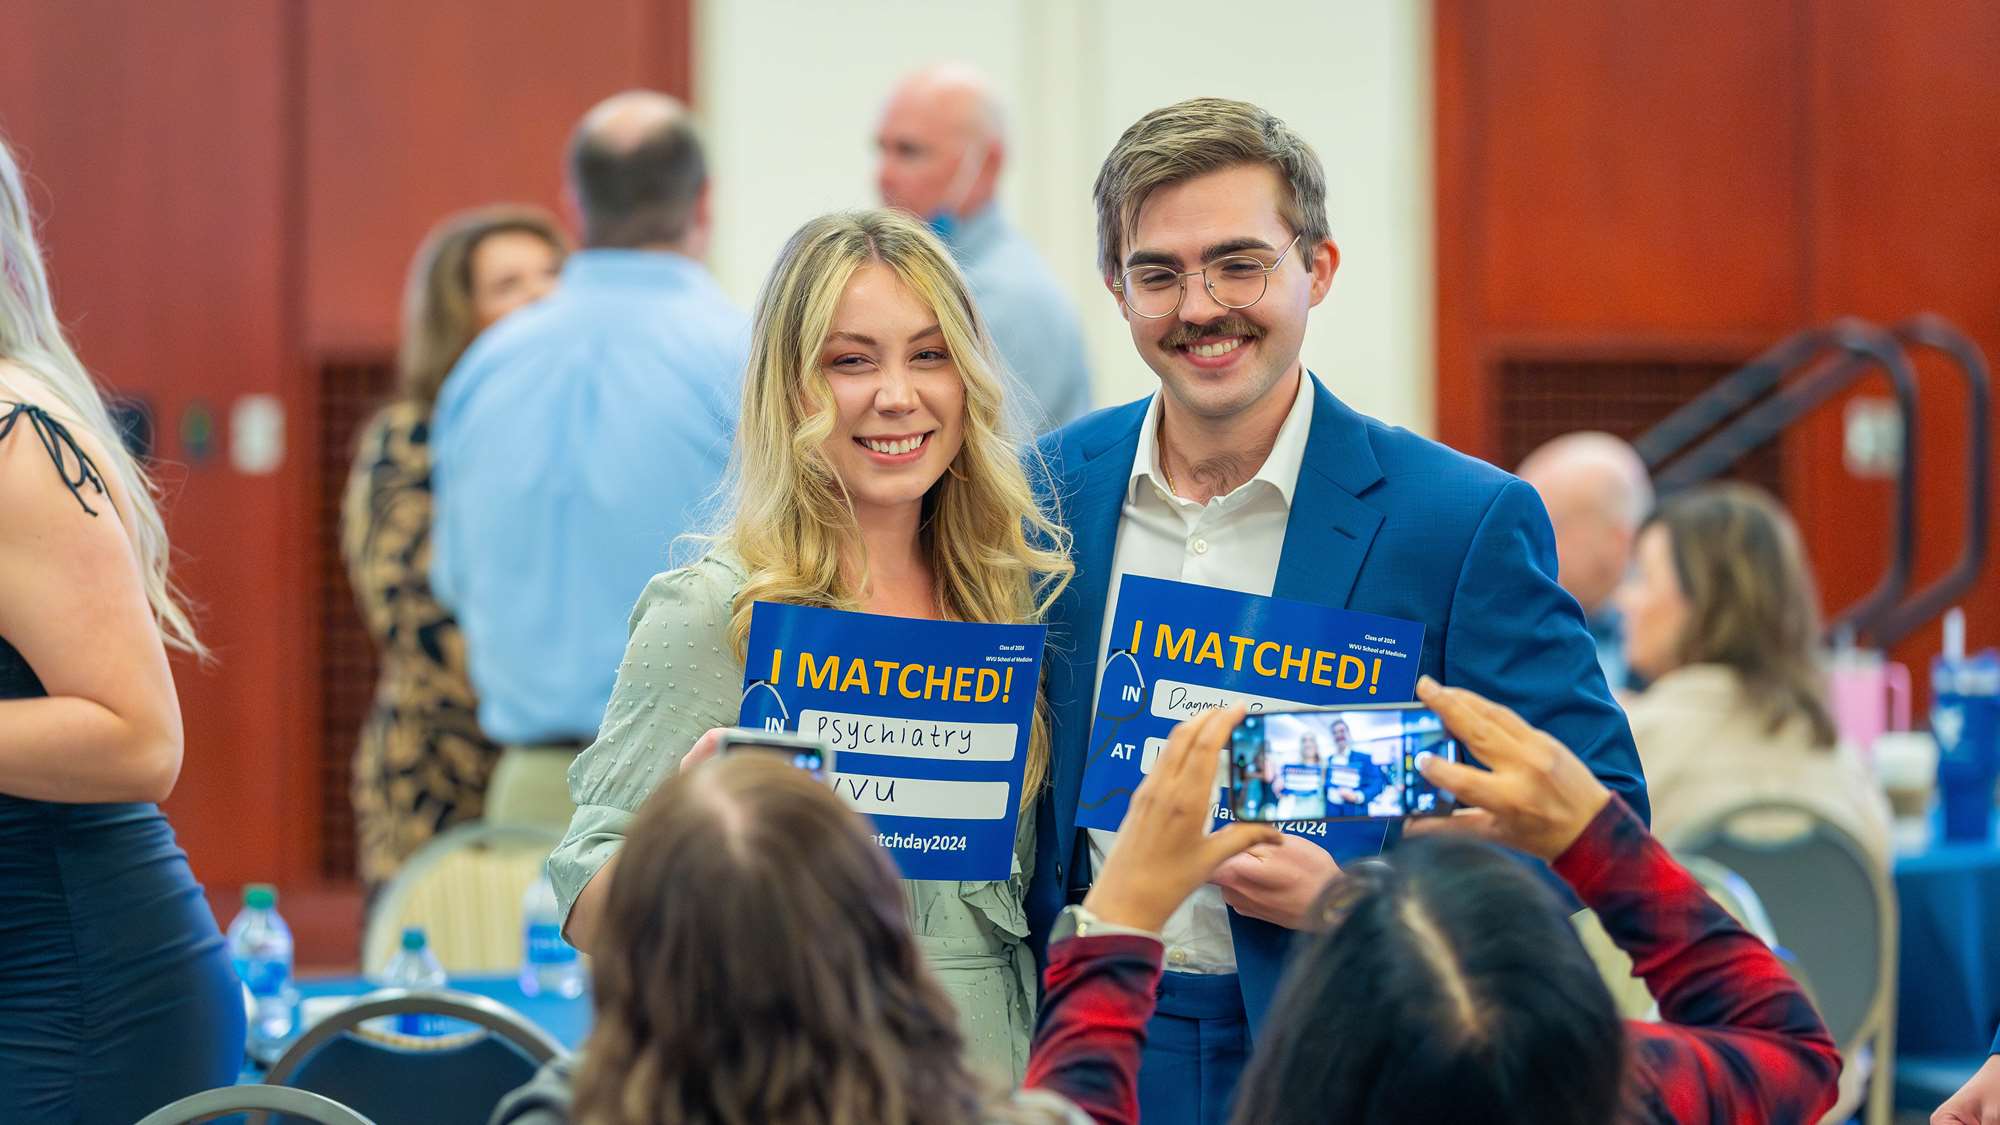 Medical students pose with signs after learning where they matched.